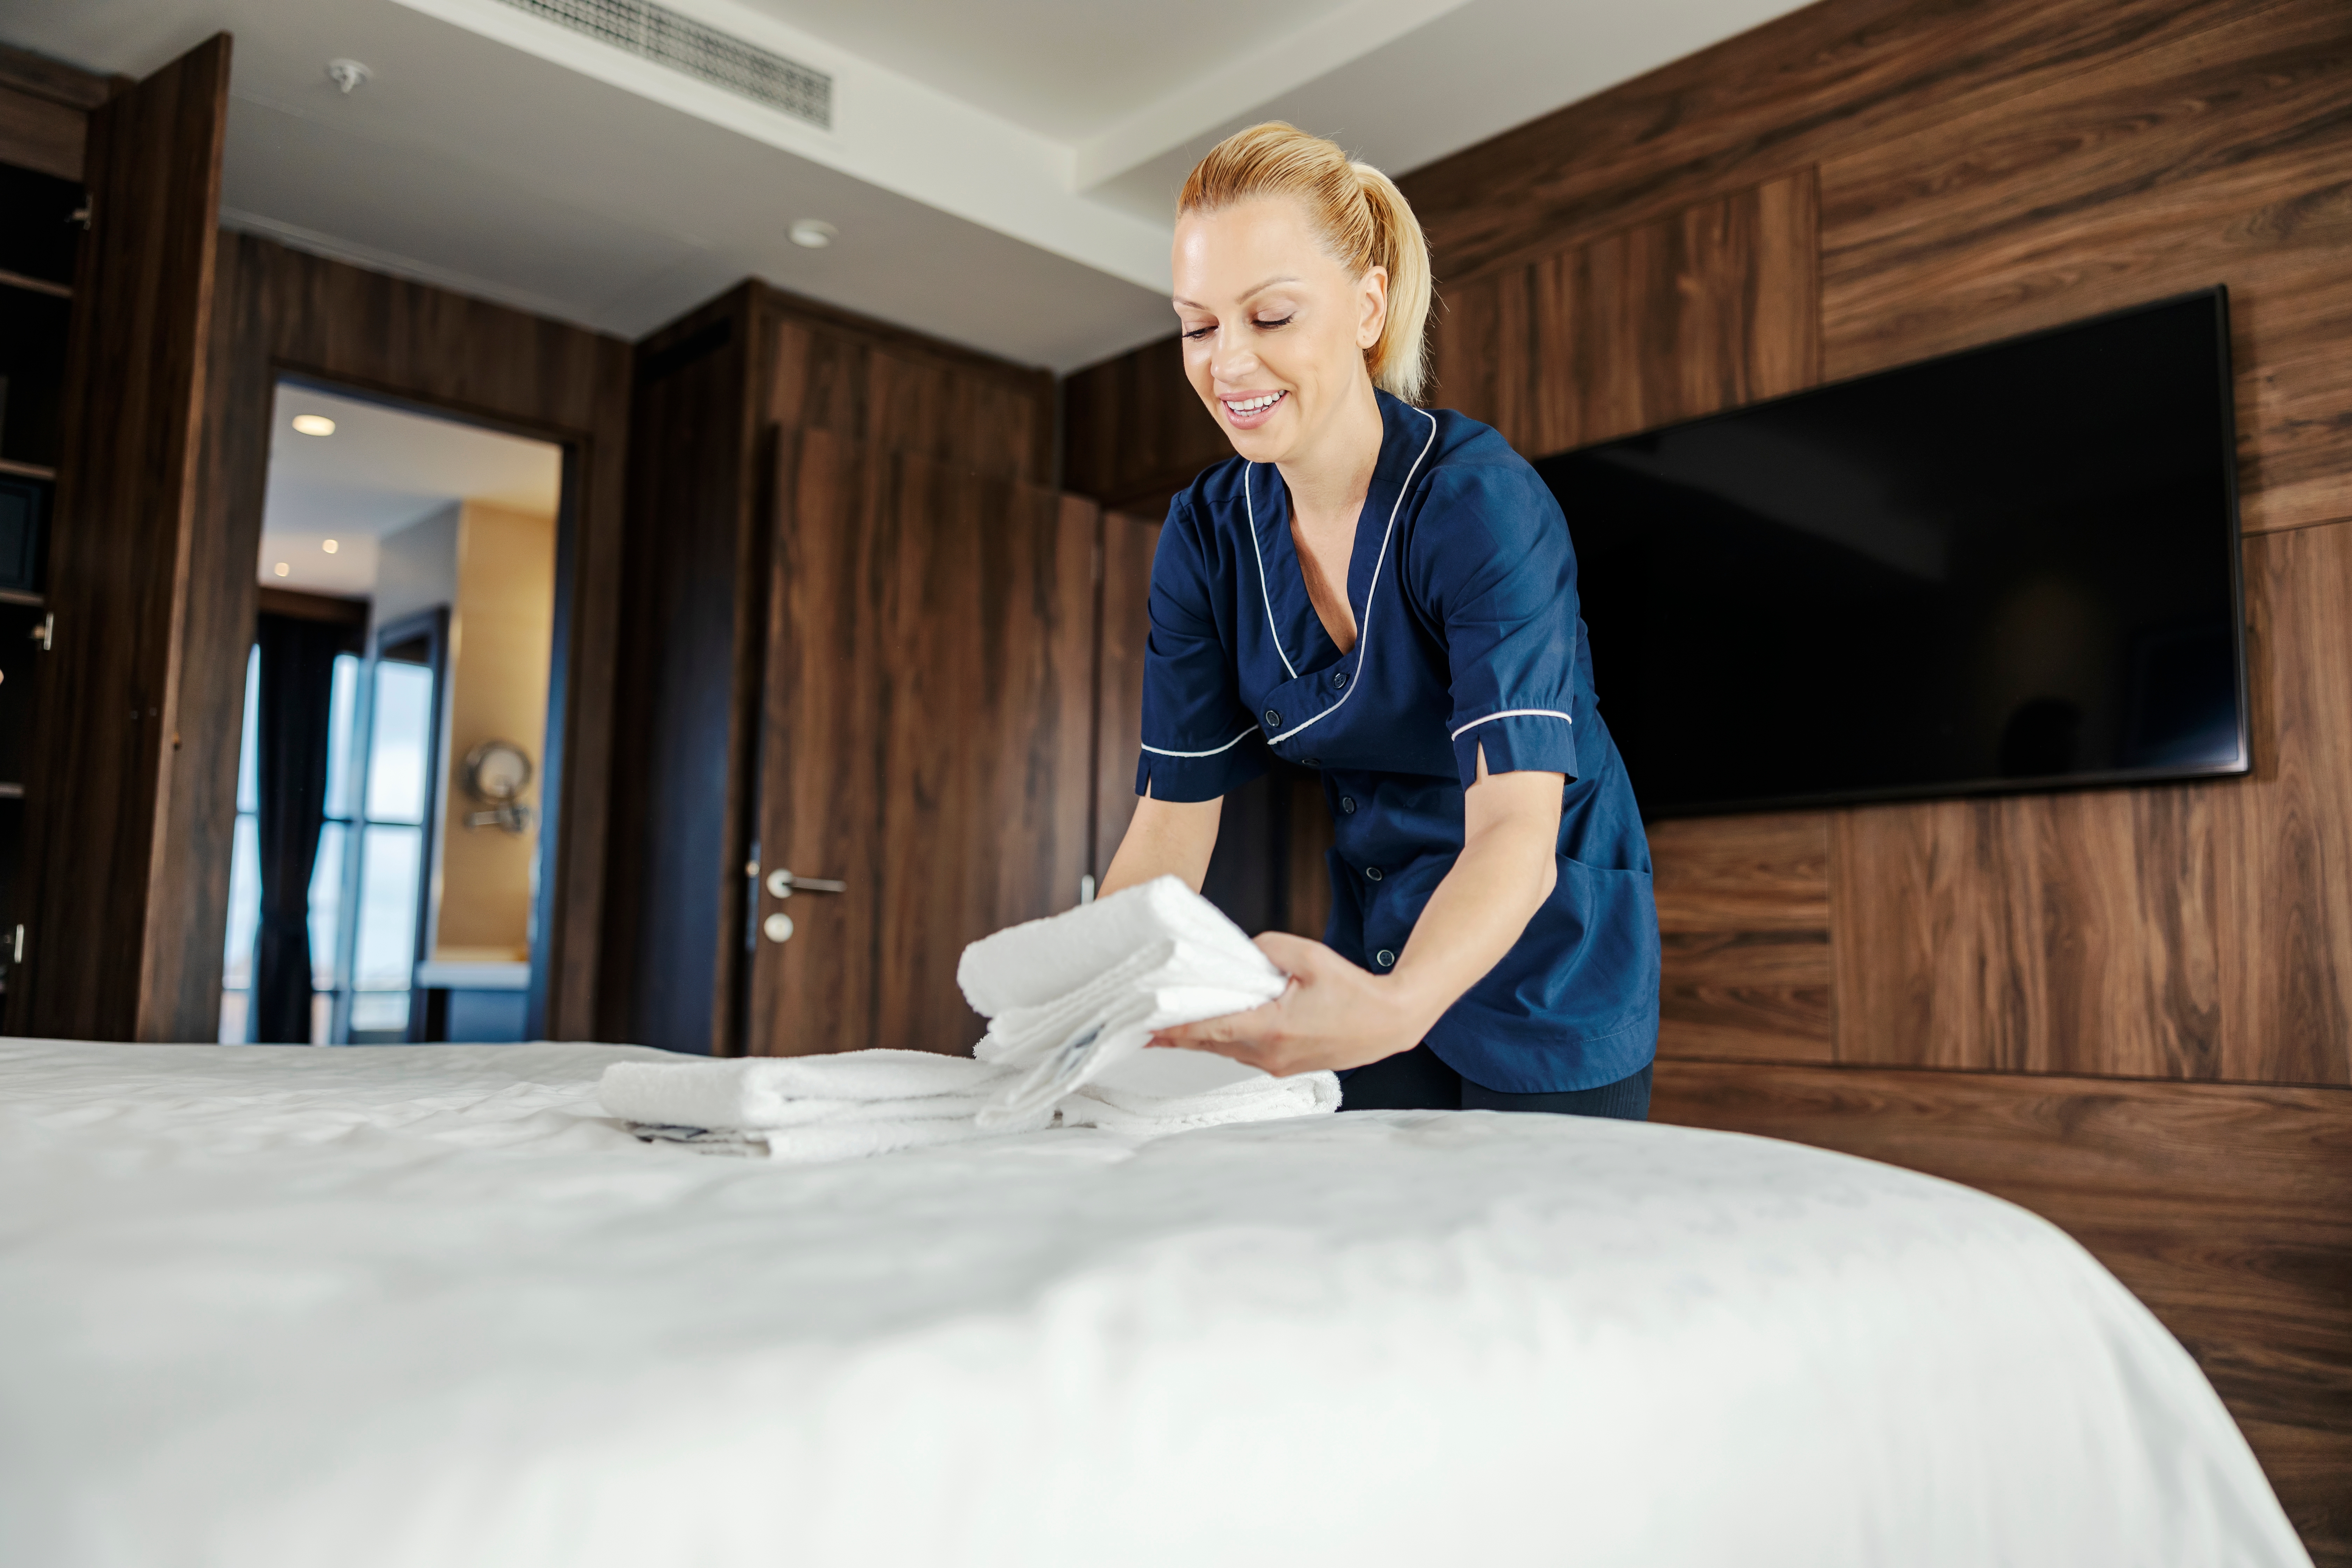 A hotel employee putting towels on a bed | Source: Shutterstock